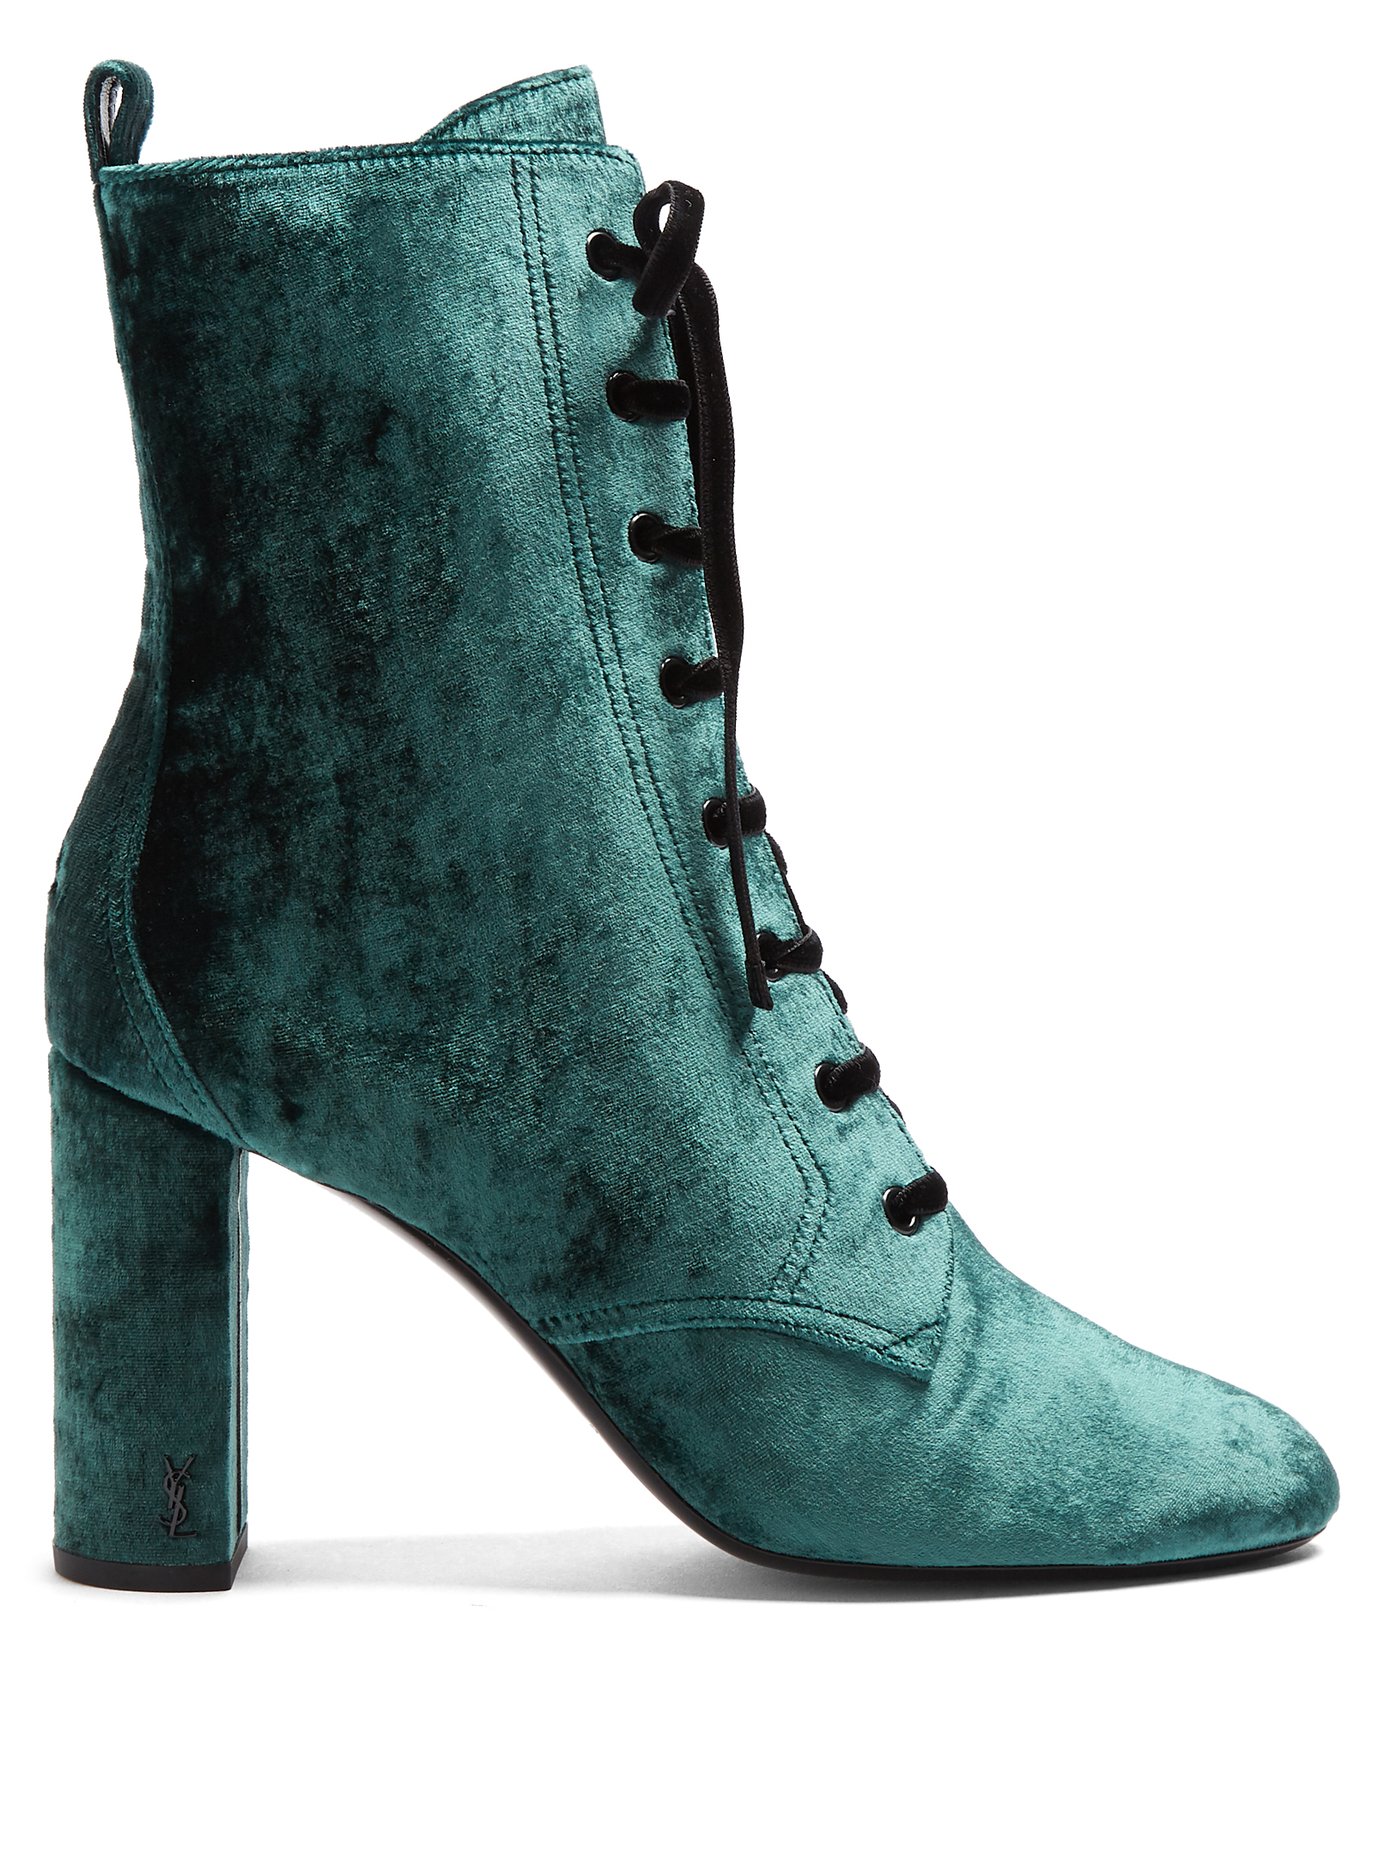 Loulou lace-up crushed-velvet ankle 